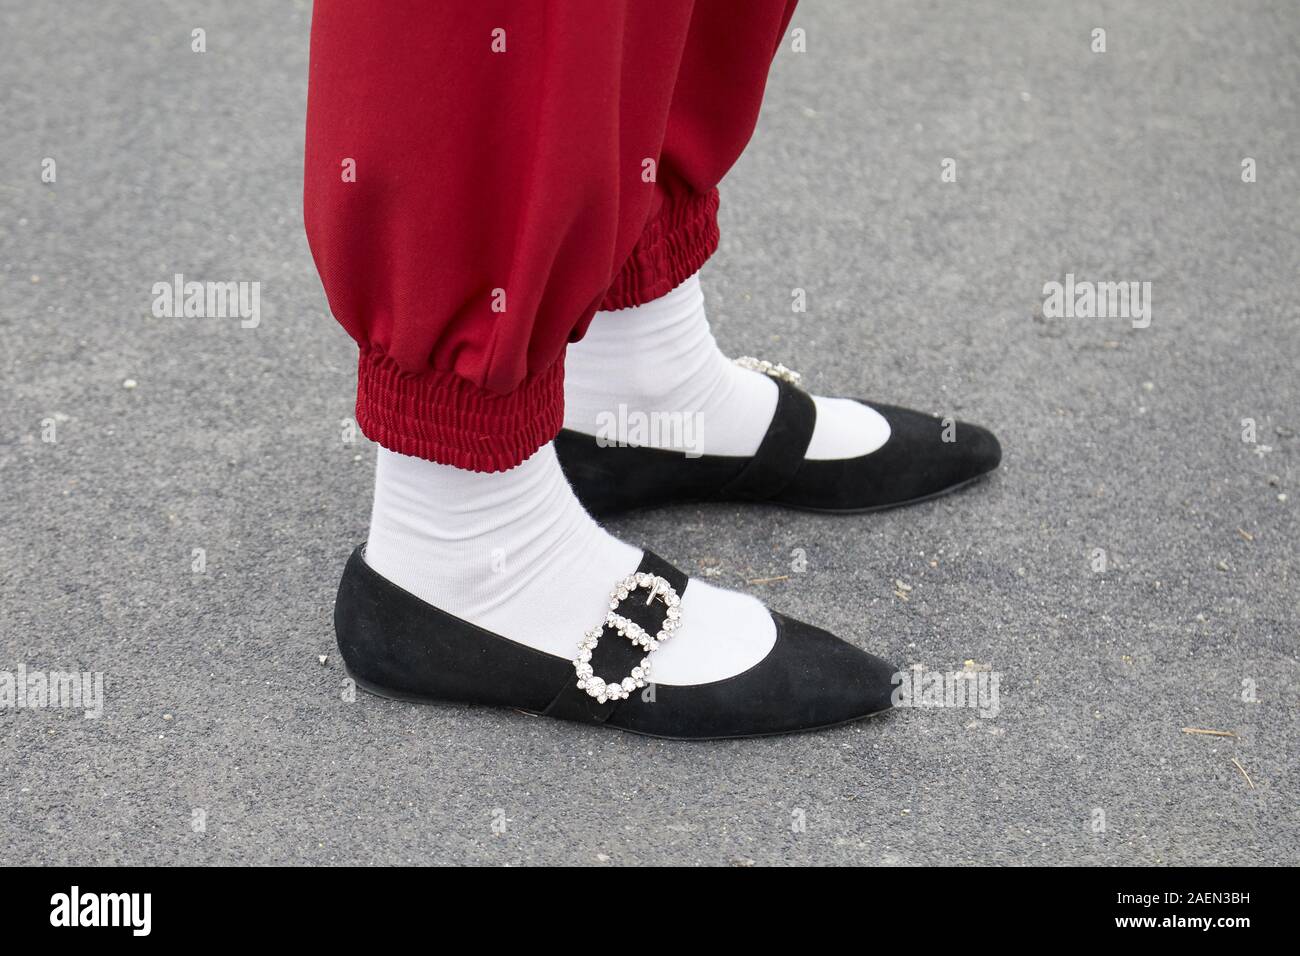 MILAN, ITALY - SEPTEMBER 22, 2019: Woman with red trousers, white socks and  black shoes with gems before Gucci fashion show, Milan Fashion Week street  Stock Photo - Alamy